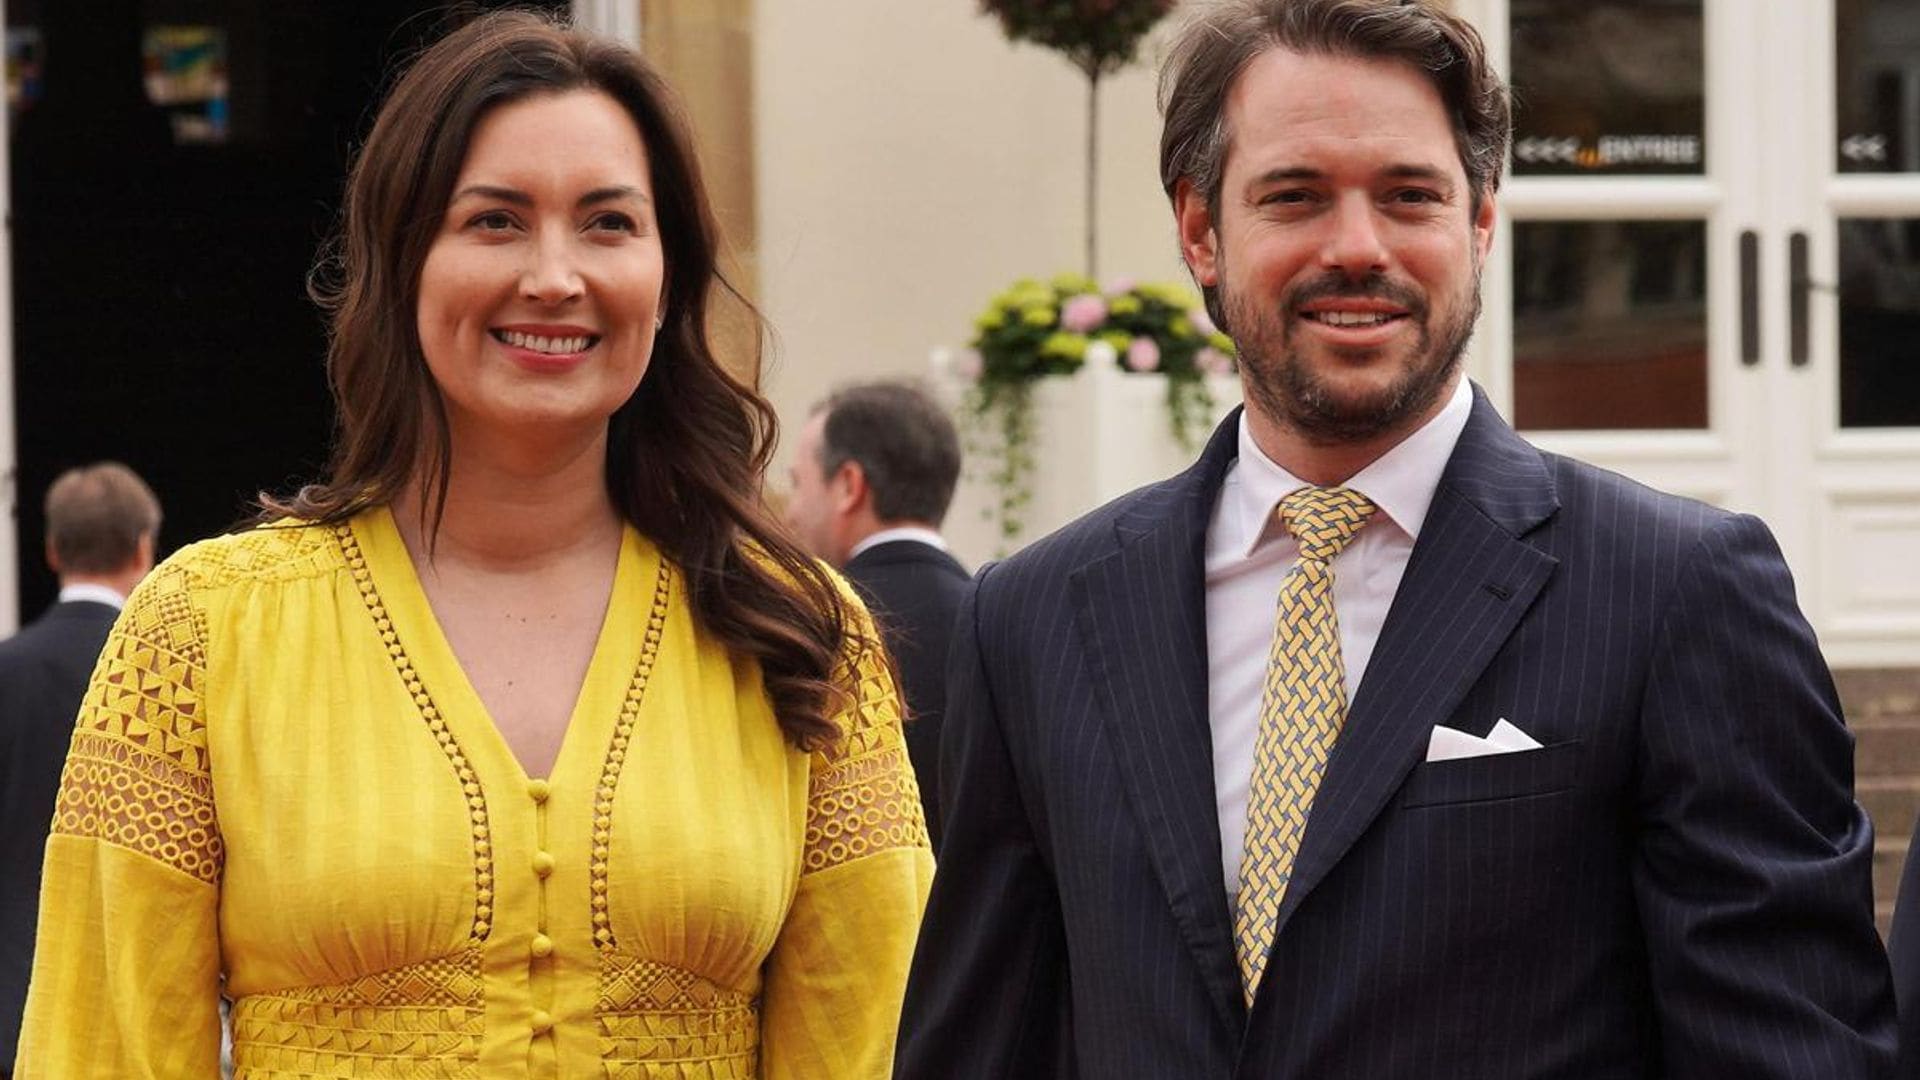 Prince and Princess of Luxembourg welcome their third child